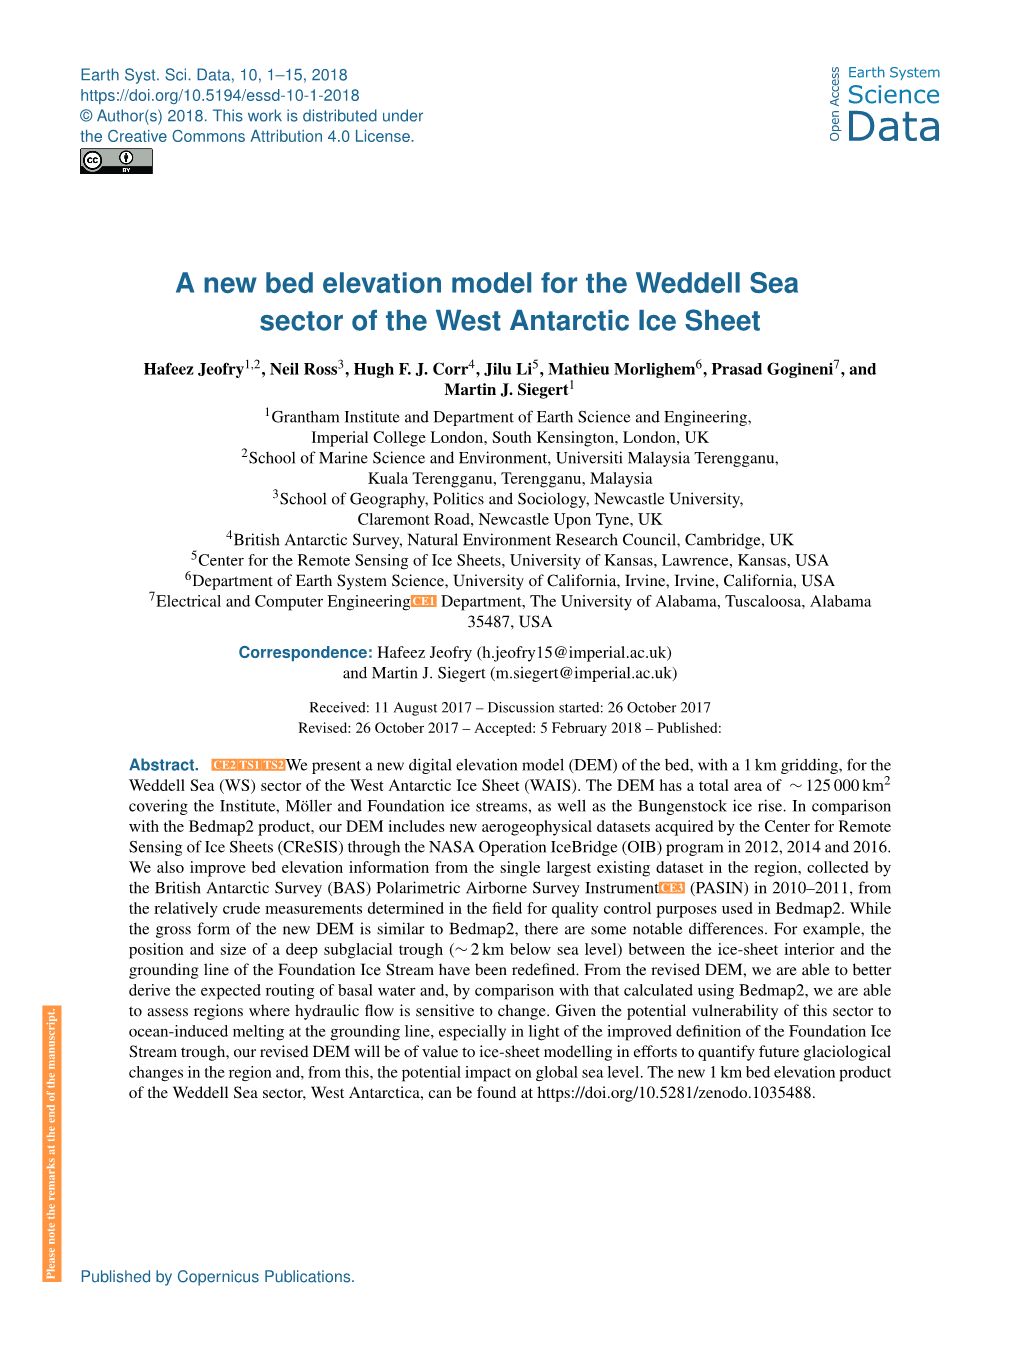 A New Bed Elevation Model for the Weddell Sea Sector of the West Antarctic Ice Sheet